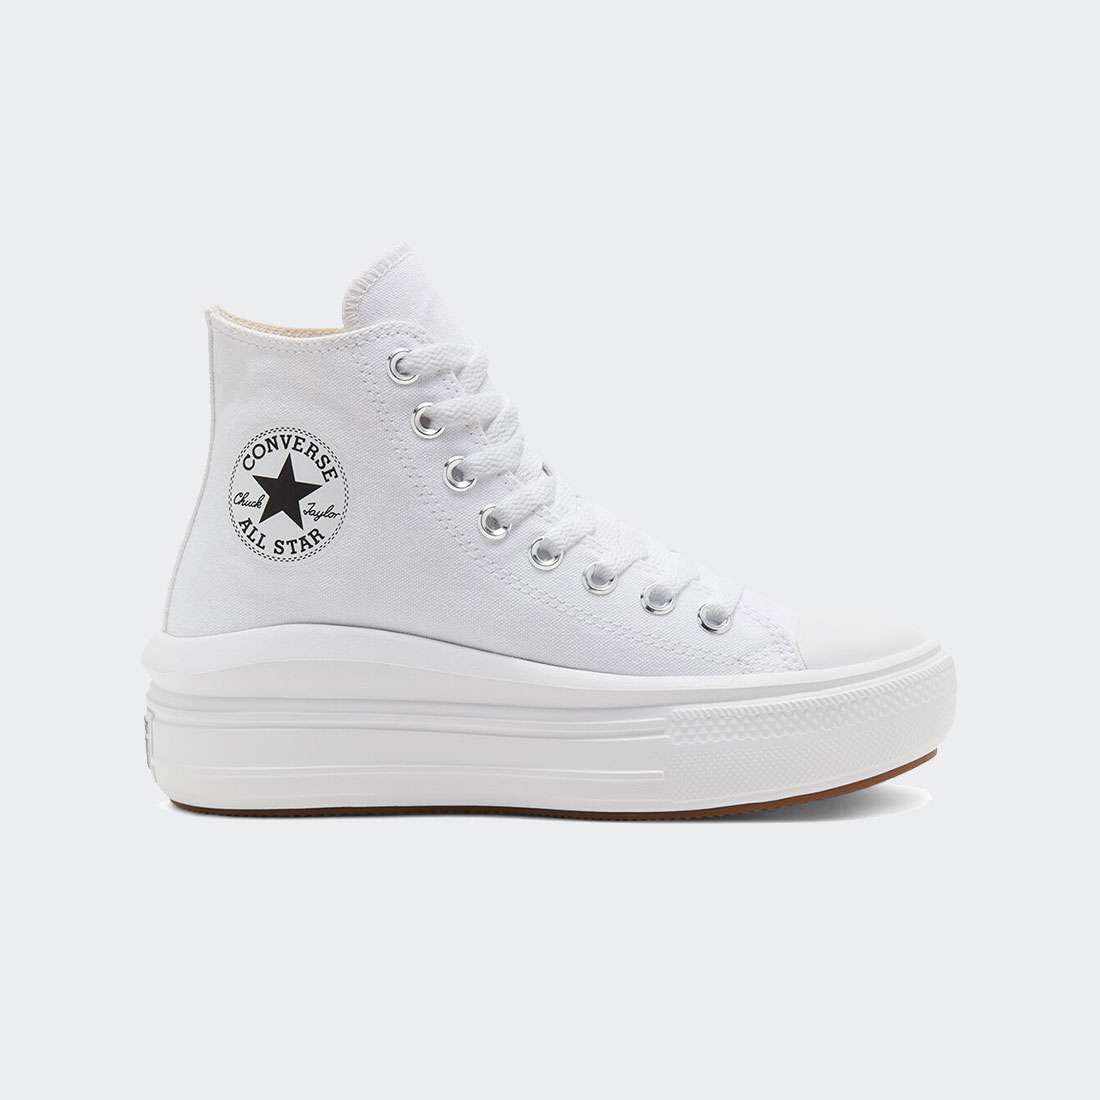 CONVERSE CHUCK TAYLOR  ALL STAR  MOVE WHITE/NATURAL IVORY/BLACK